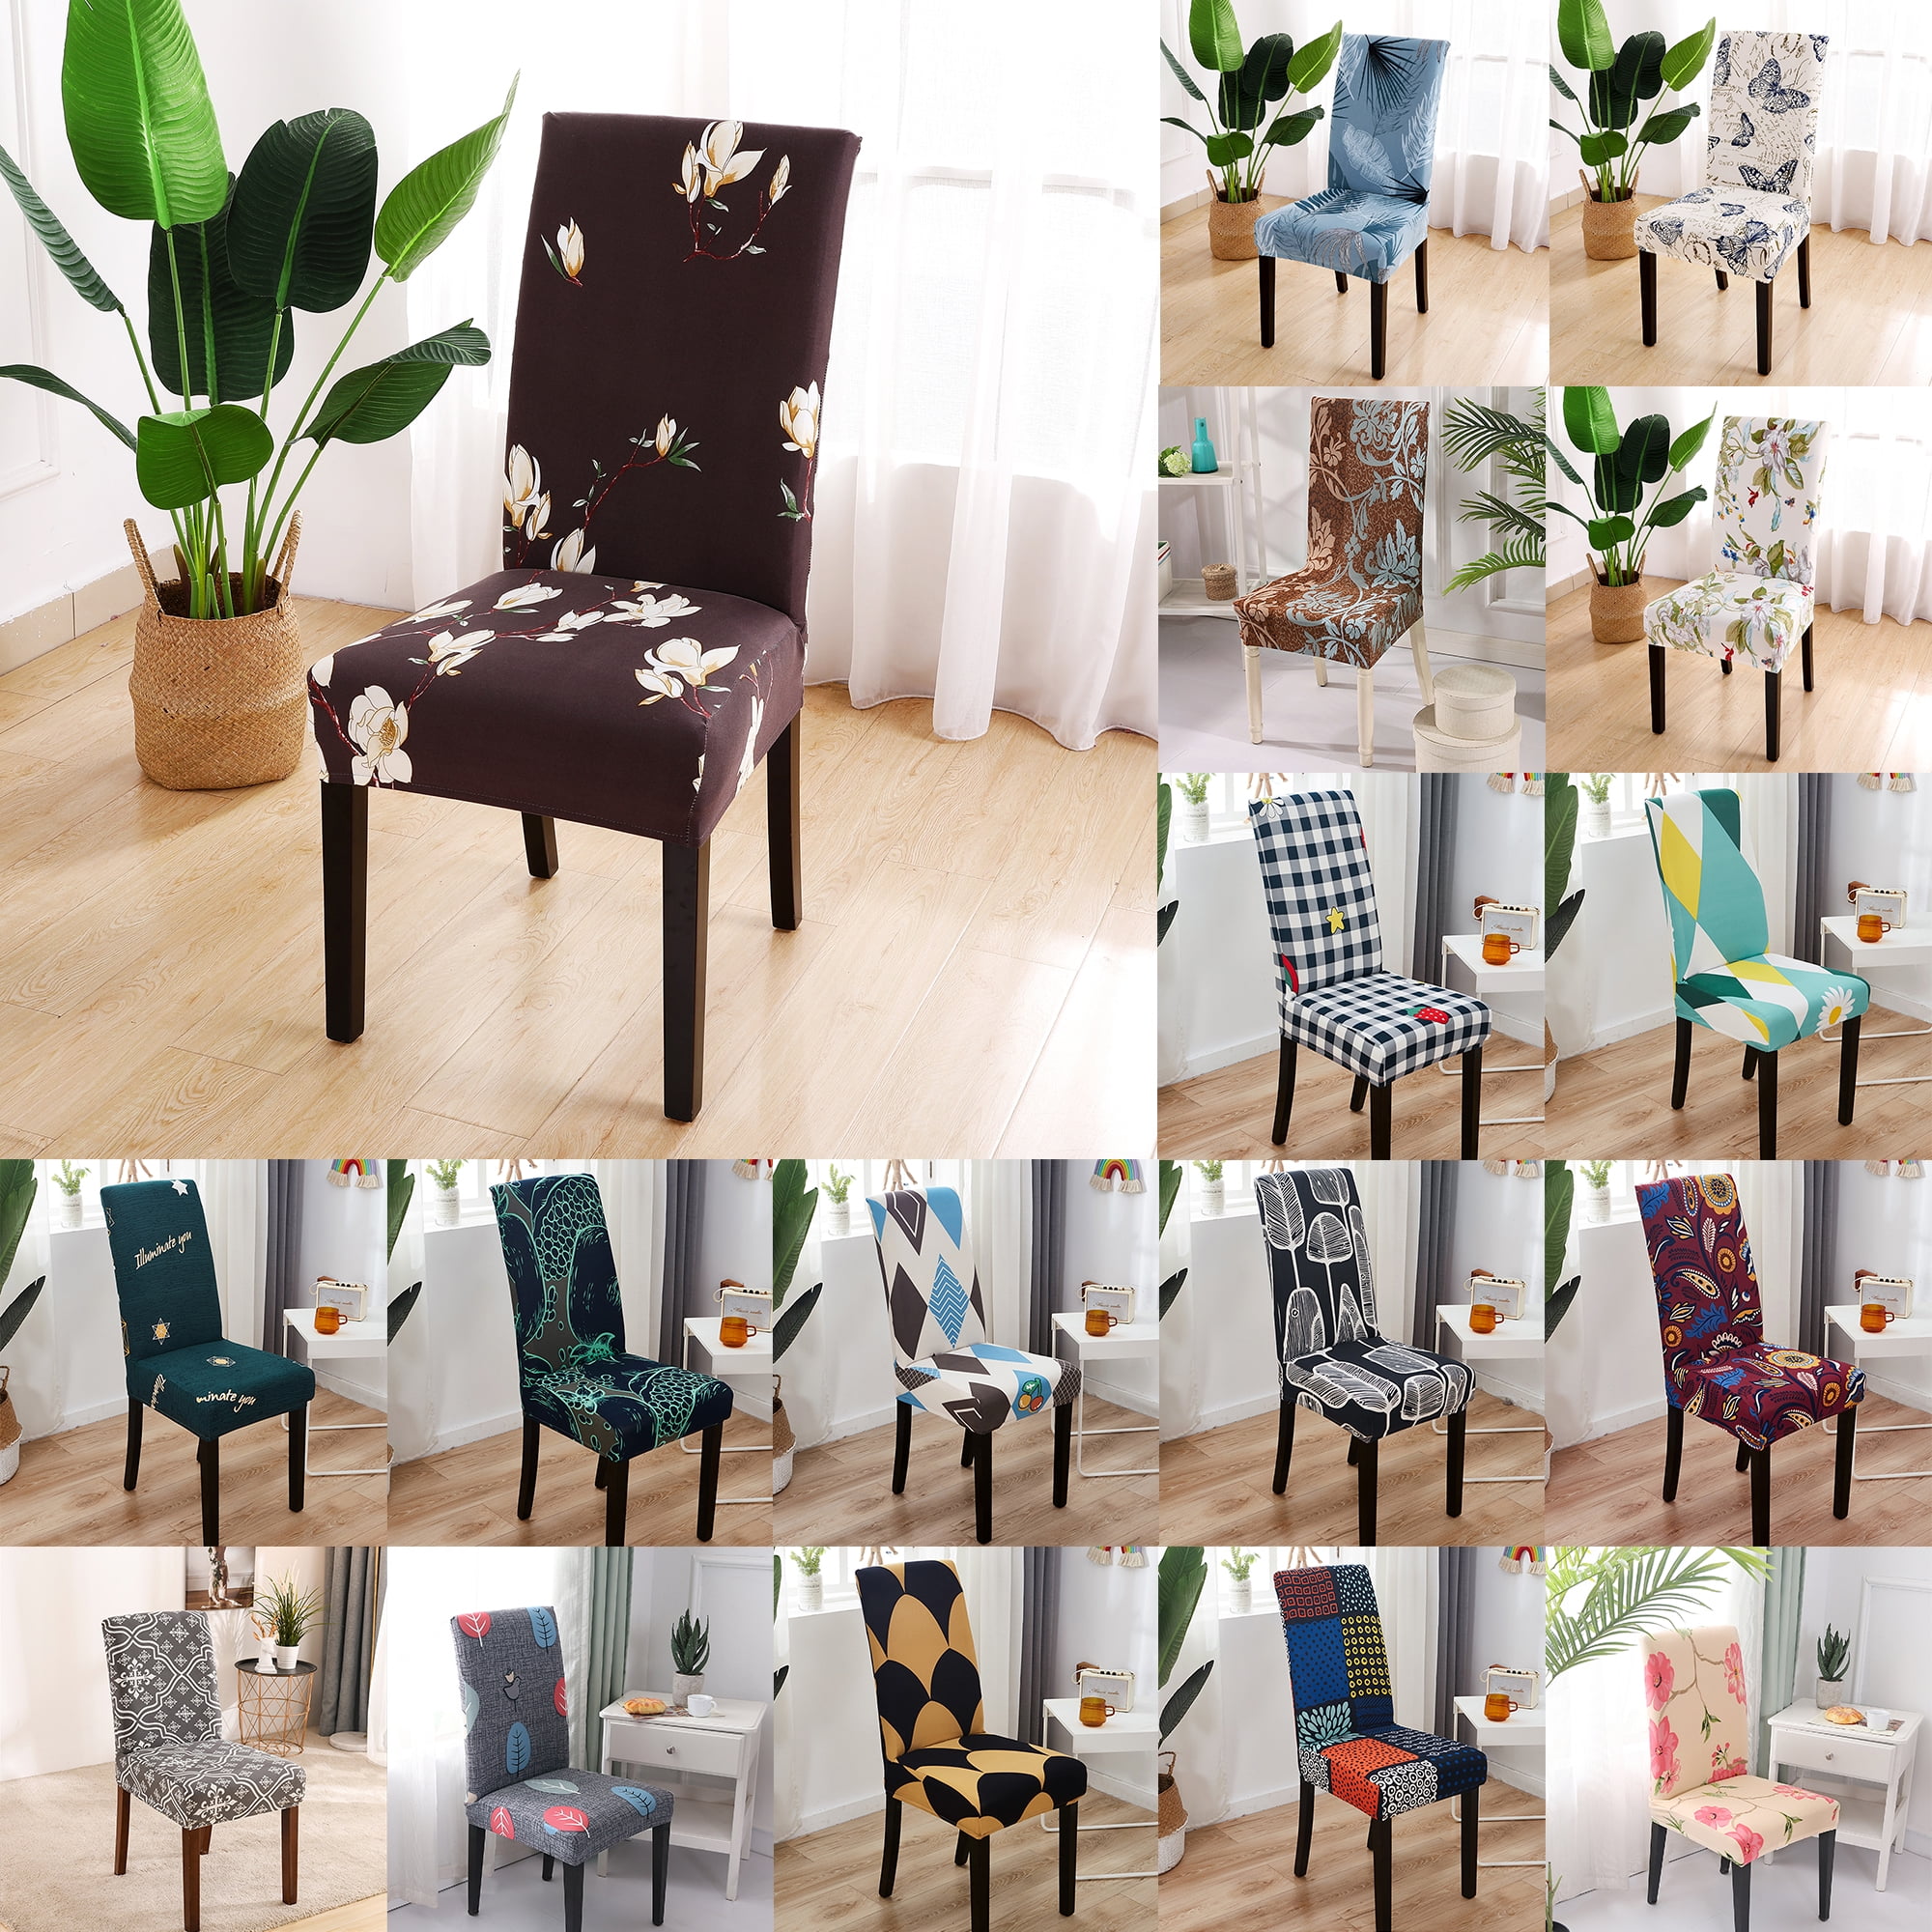 6 Color Stretch Spandex Chair Covers Removable Slipcovers Seat Cusion Room Decor 